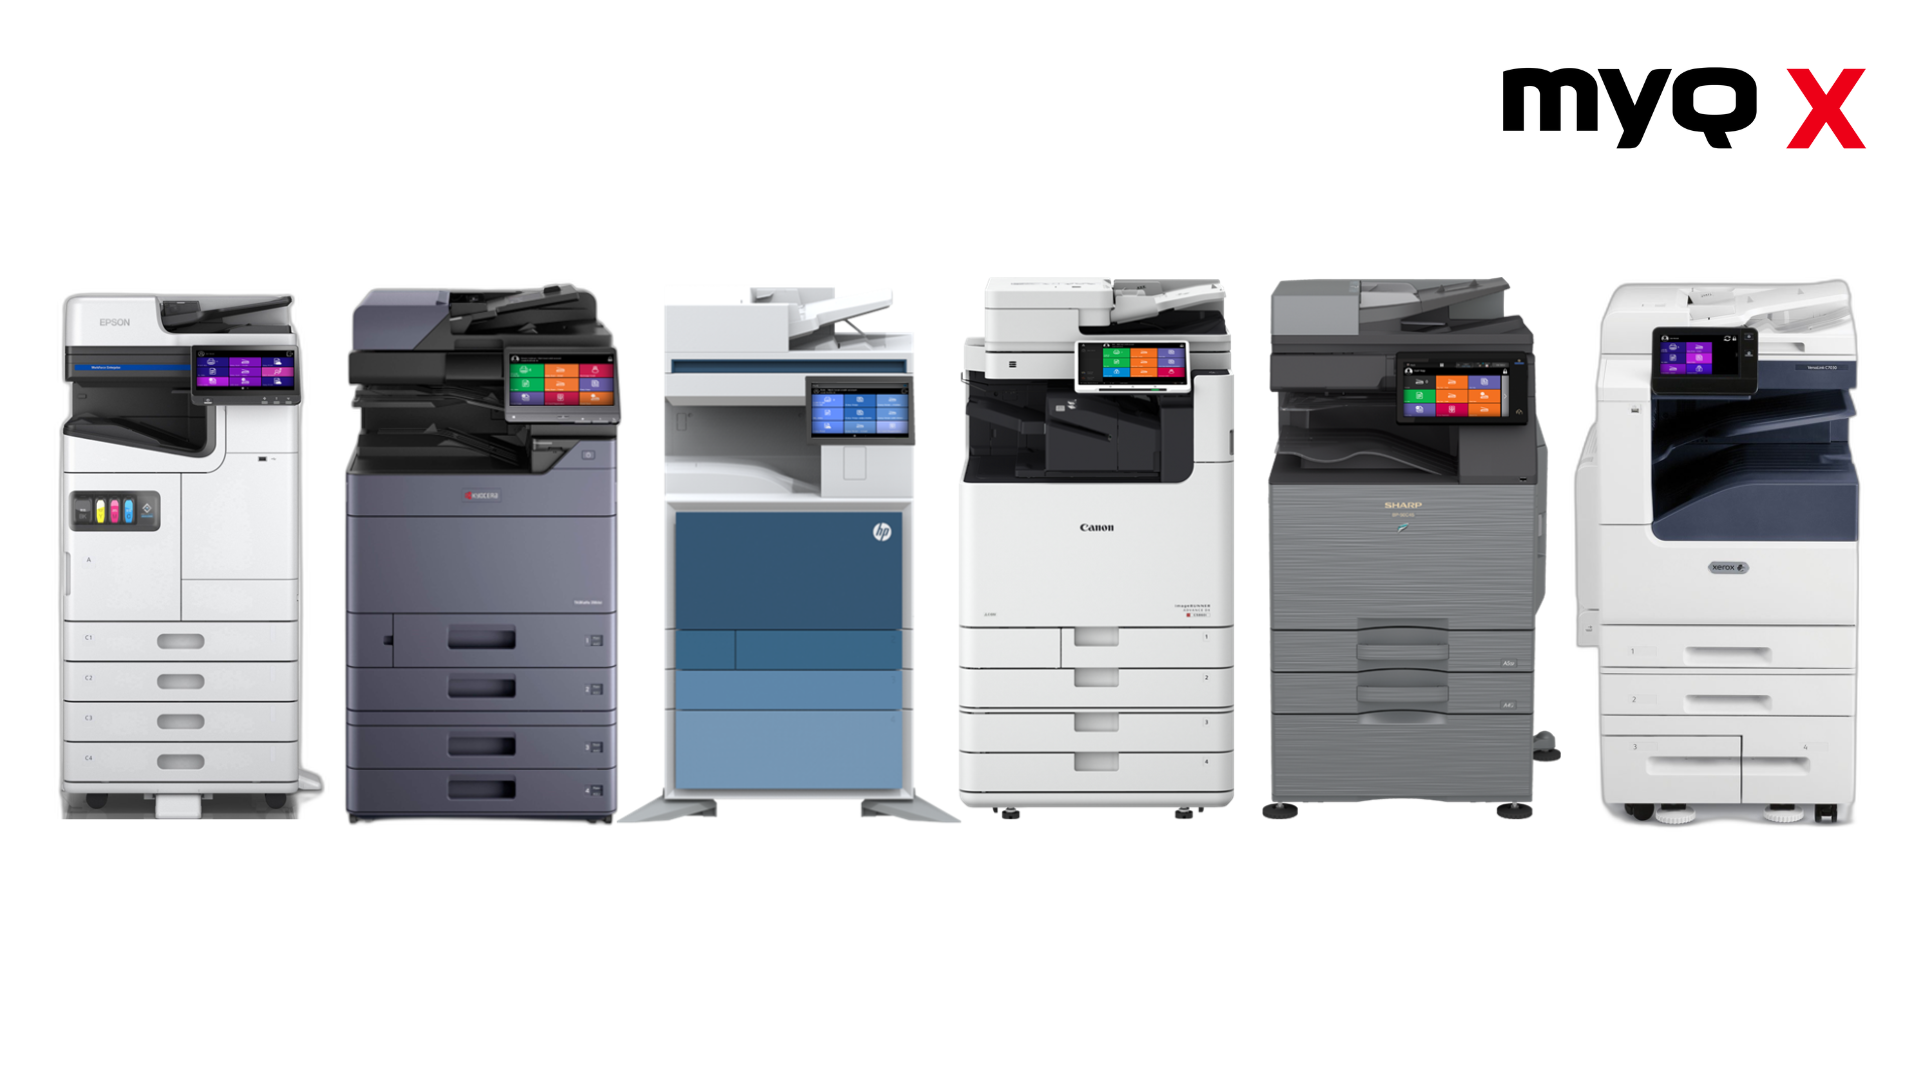 MyQ X is a true multivendor print management solution, supporting a wide range of printers from leading manufacturers.